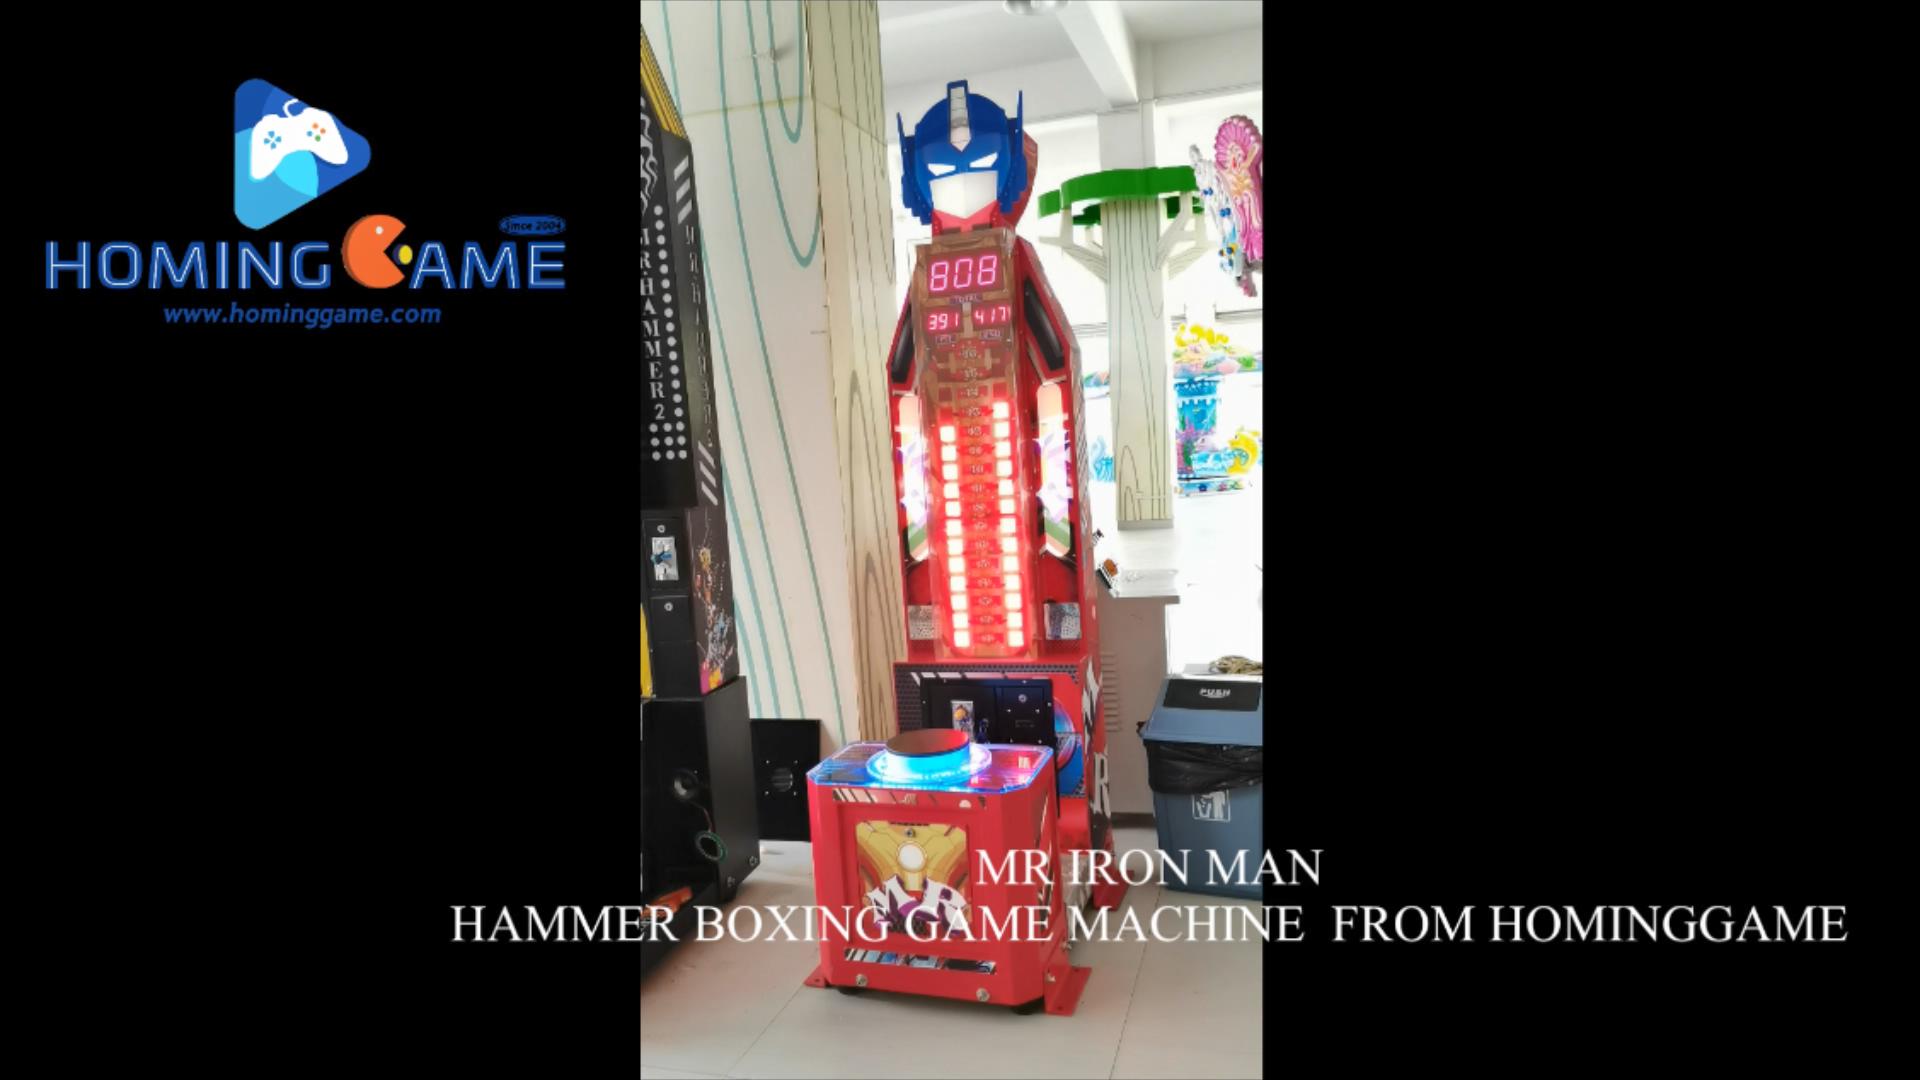 Funny Competitive Mr IronMan Hammer Arcade Boxing Game Machine